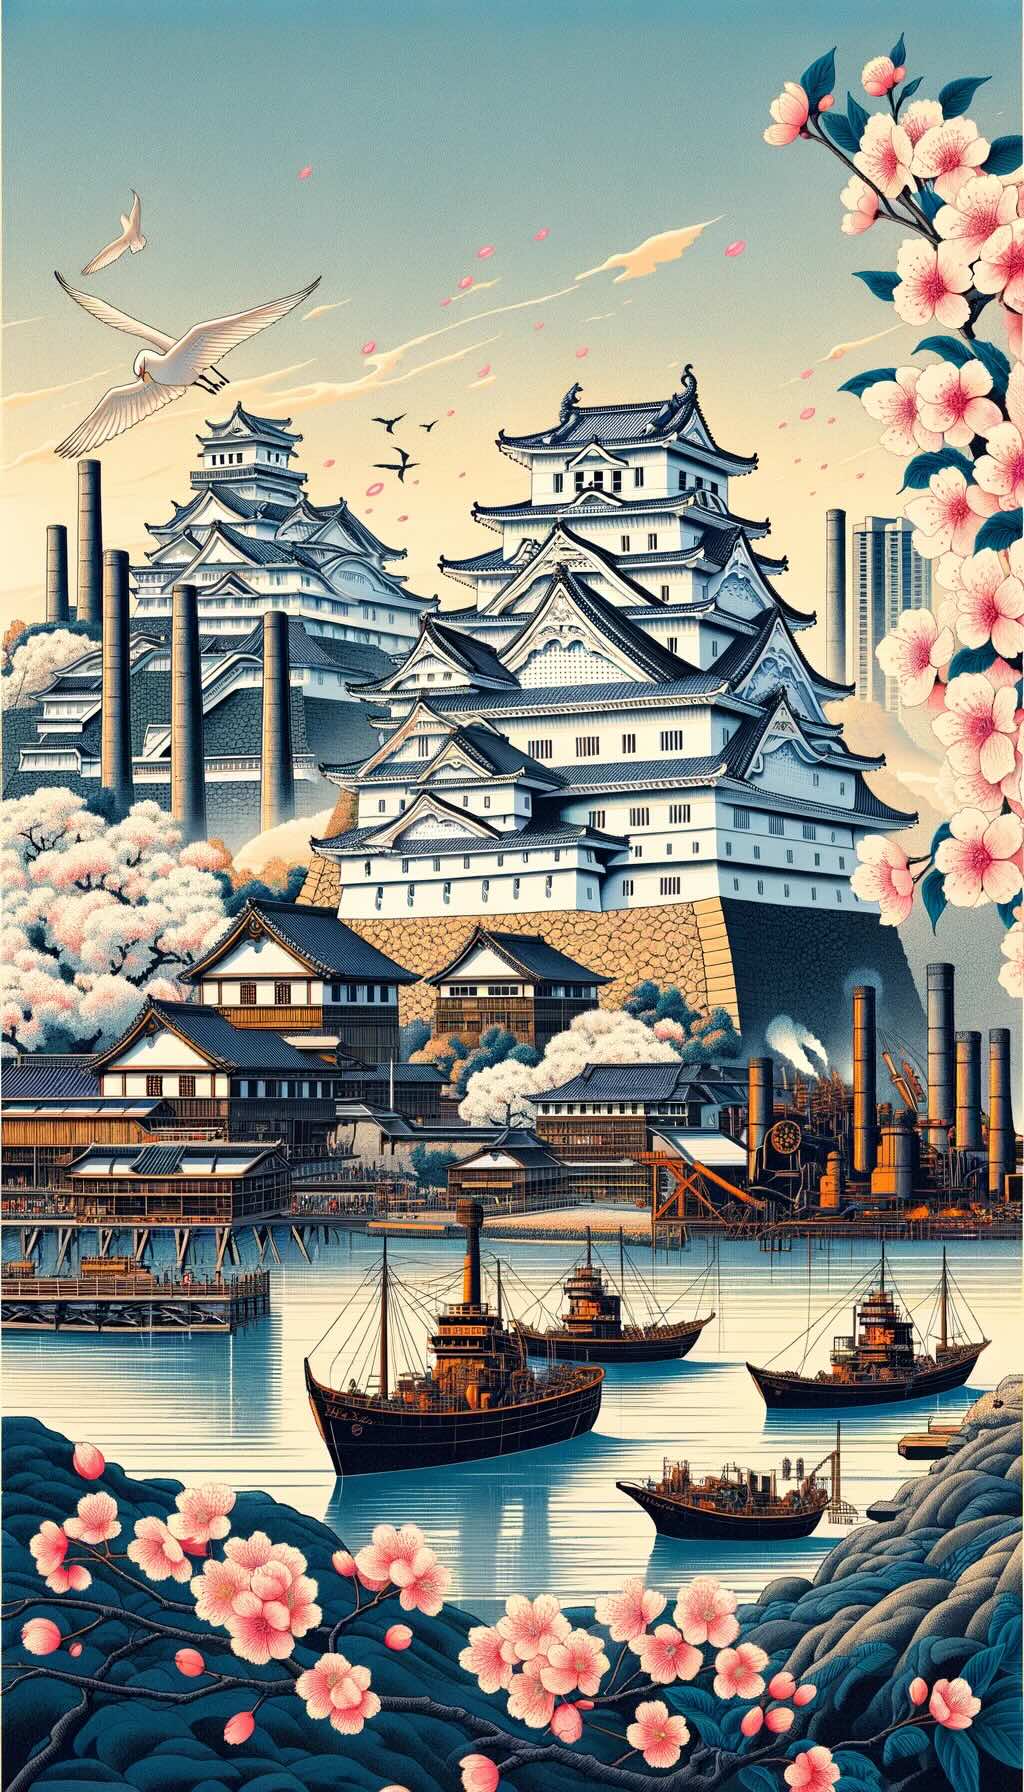 Japan's historical structures, including Himeji Castle and the Sites of Japan’s Meiji Industrial Revolution. The artwork highlights the contrast between Japan's feudal splendor and its rapid industrialization